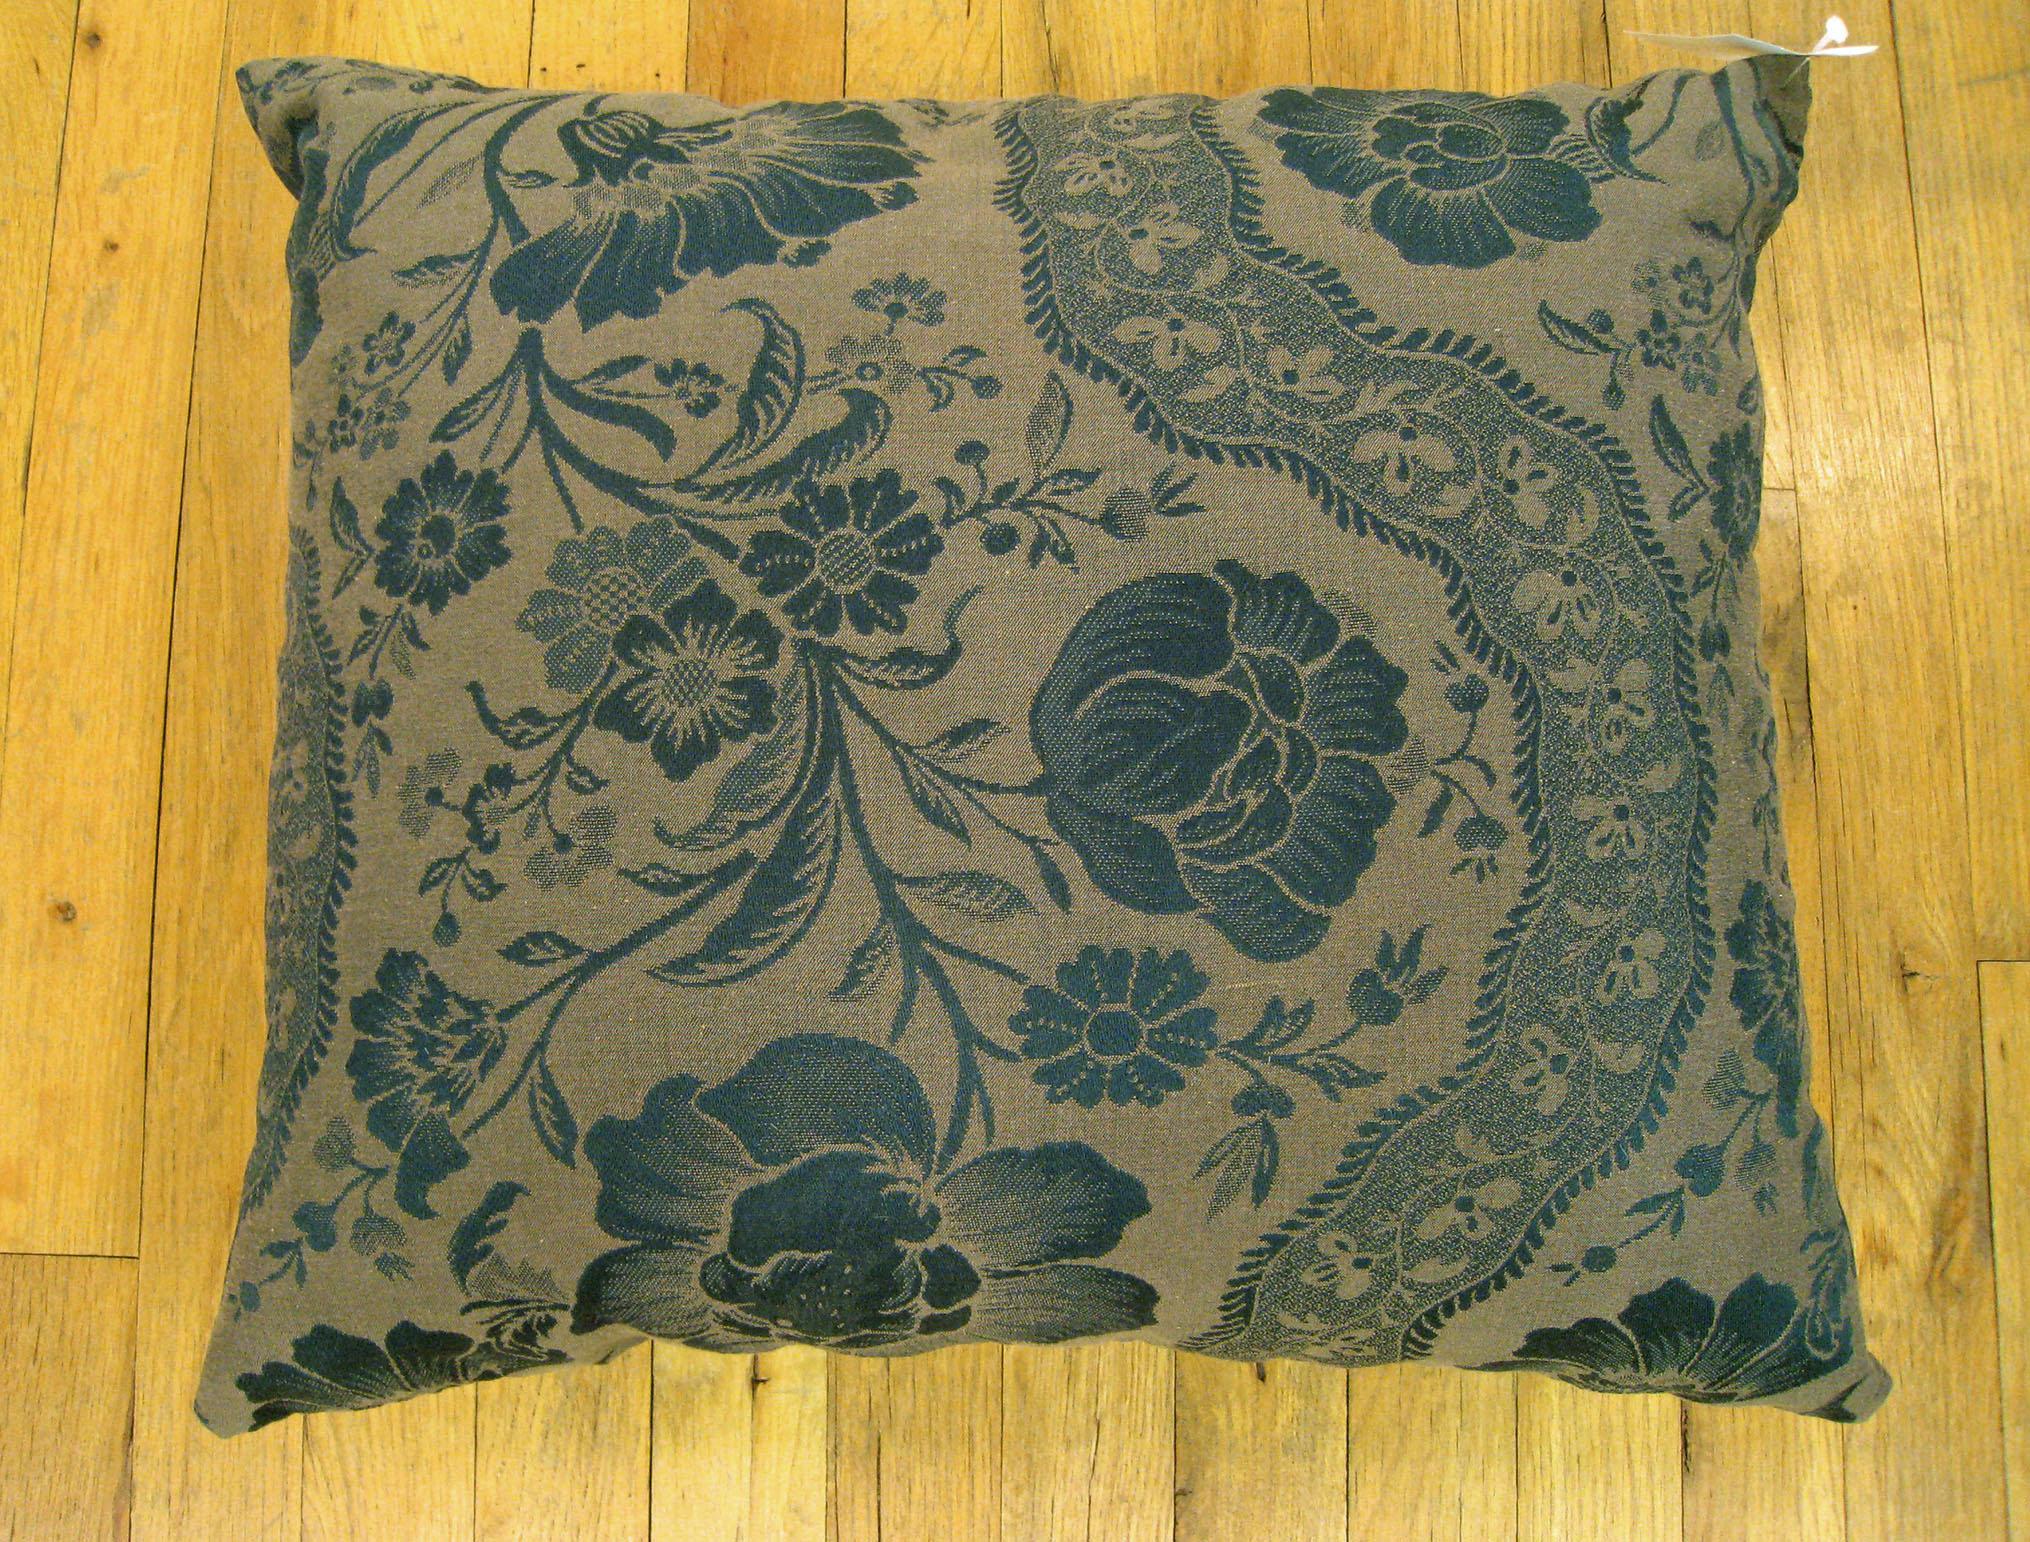 A vintage decorative pillow with a directional floral pattern, size: 22